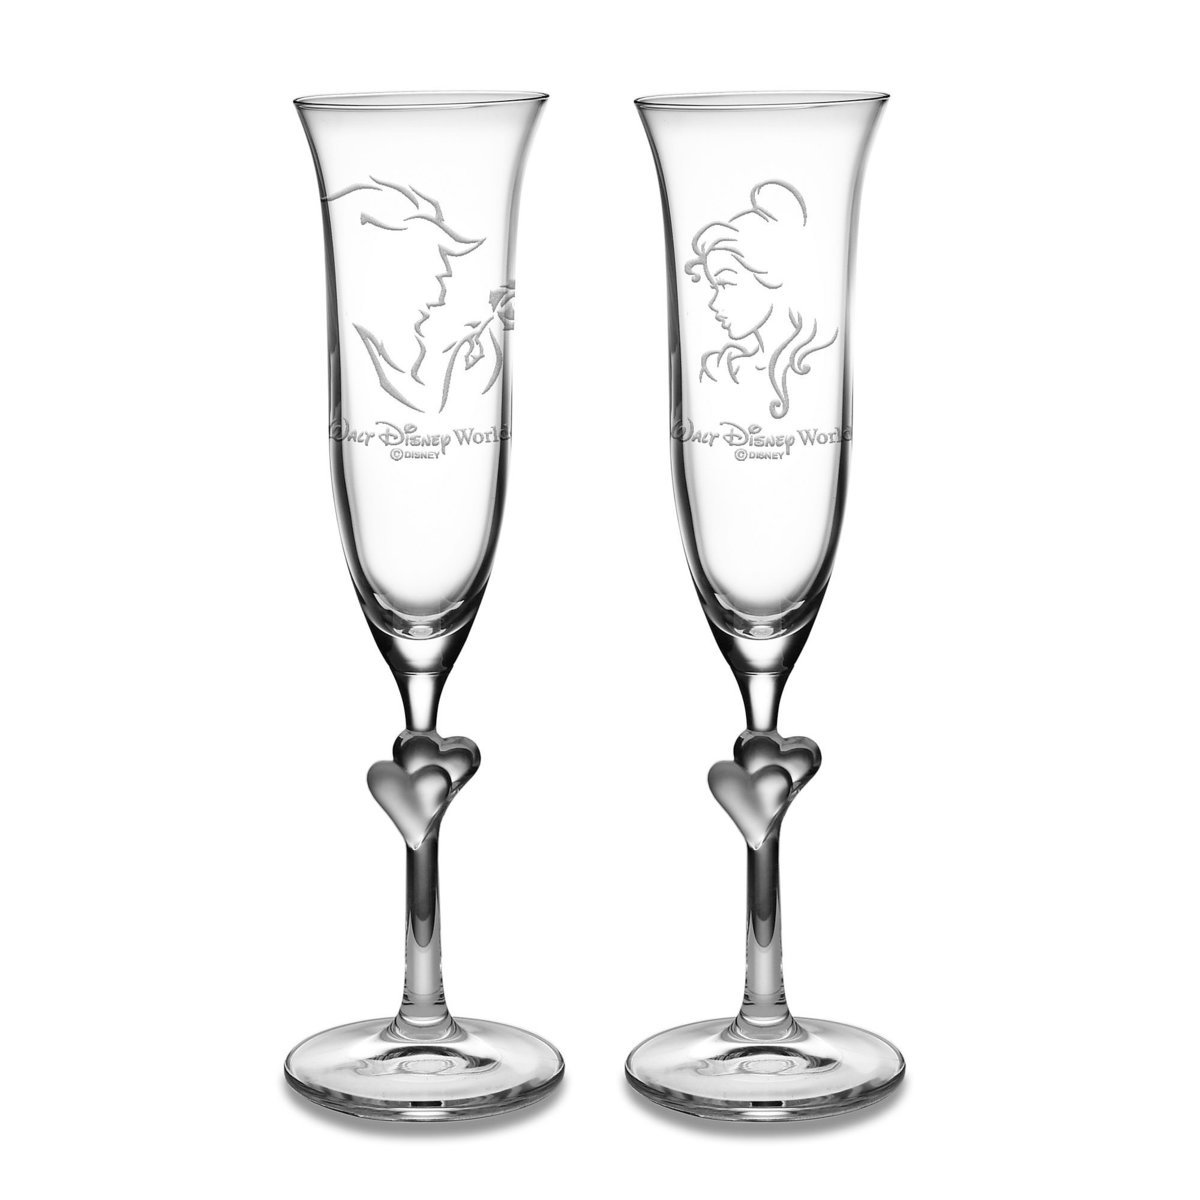 Beauty And The Beast Glass Flute Set By Arribas Personalizable